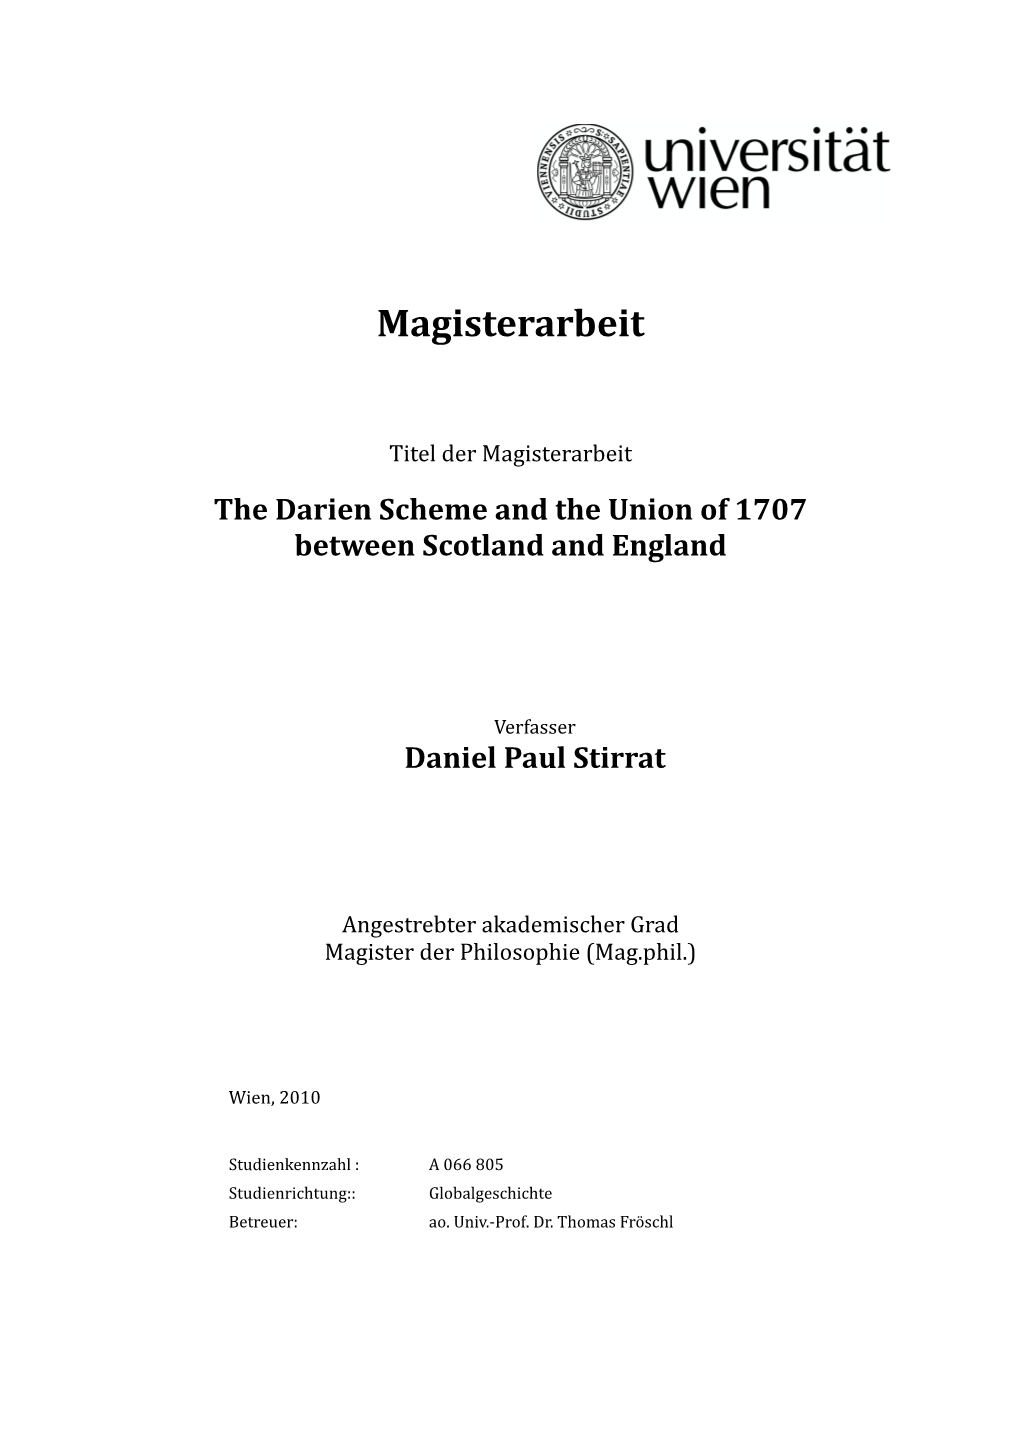 The Darien Scheme and the Union of 1707 Between Scotland and England